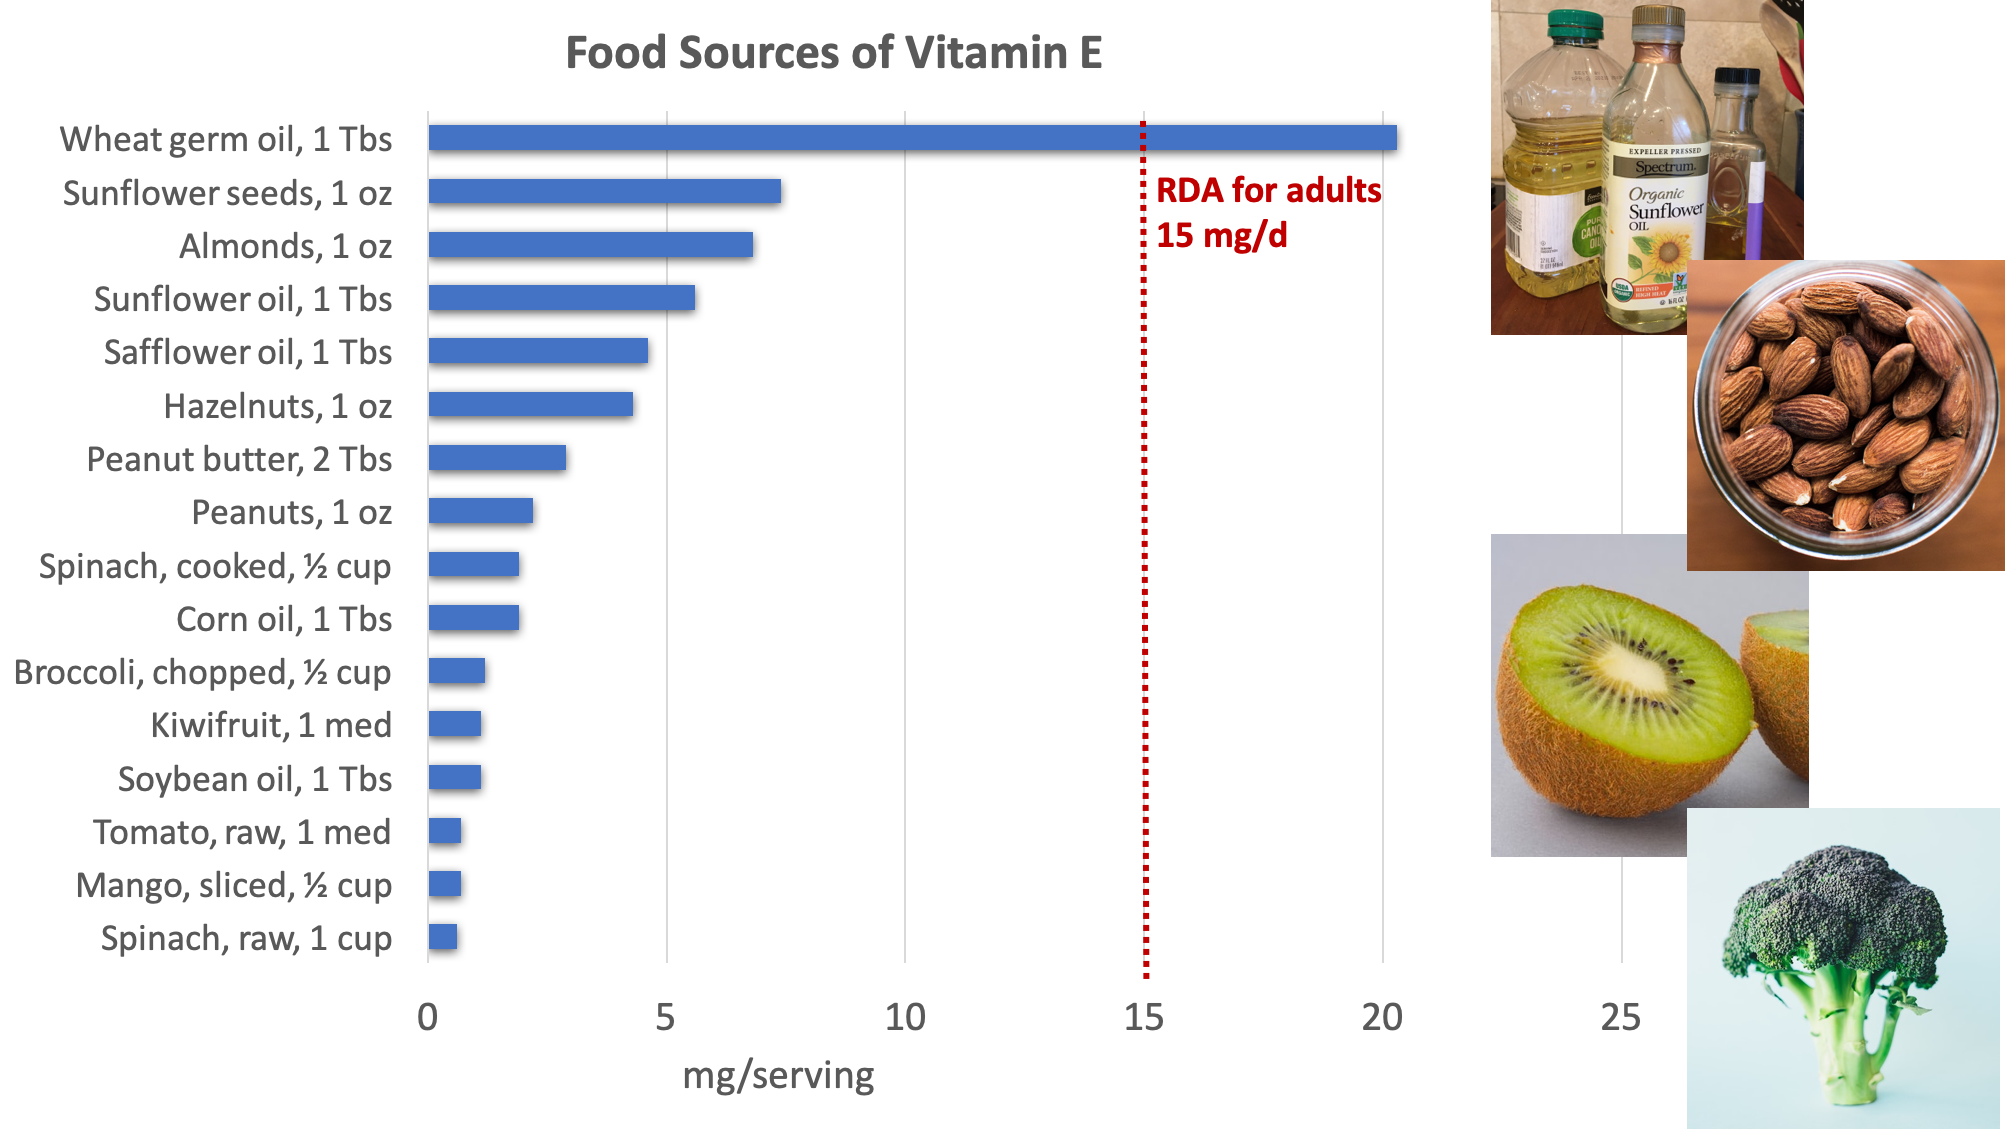 Bar graph showing dietary sources of vitamin E compared with the RDA for adults of 15 mg per day. Top sources include vegetables oils and nuts, and fruits (kiwi, mango) and vegetables (spinach, broccoli, tomatoes) provide moderate amounts. Photos are shown of vegetable oils, almonds, kiwi, and broccoli.